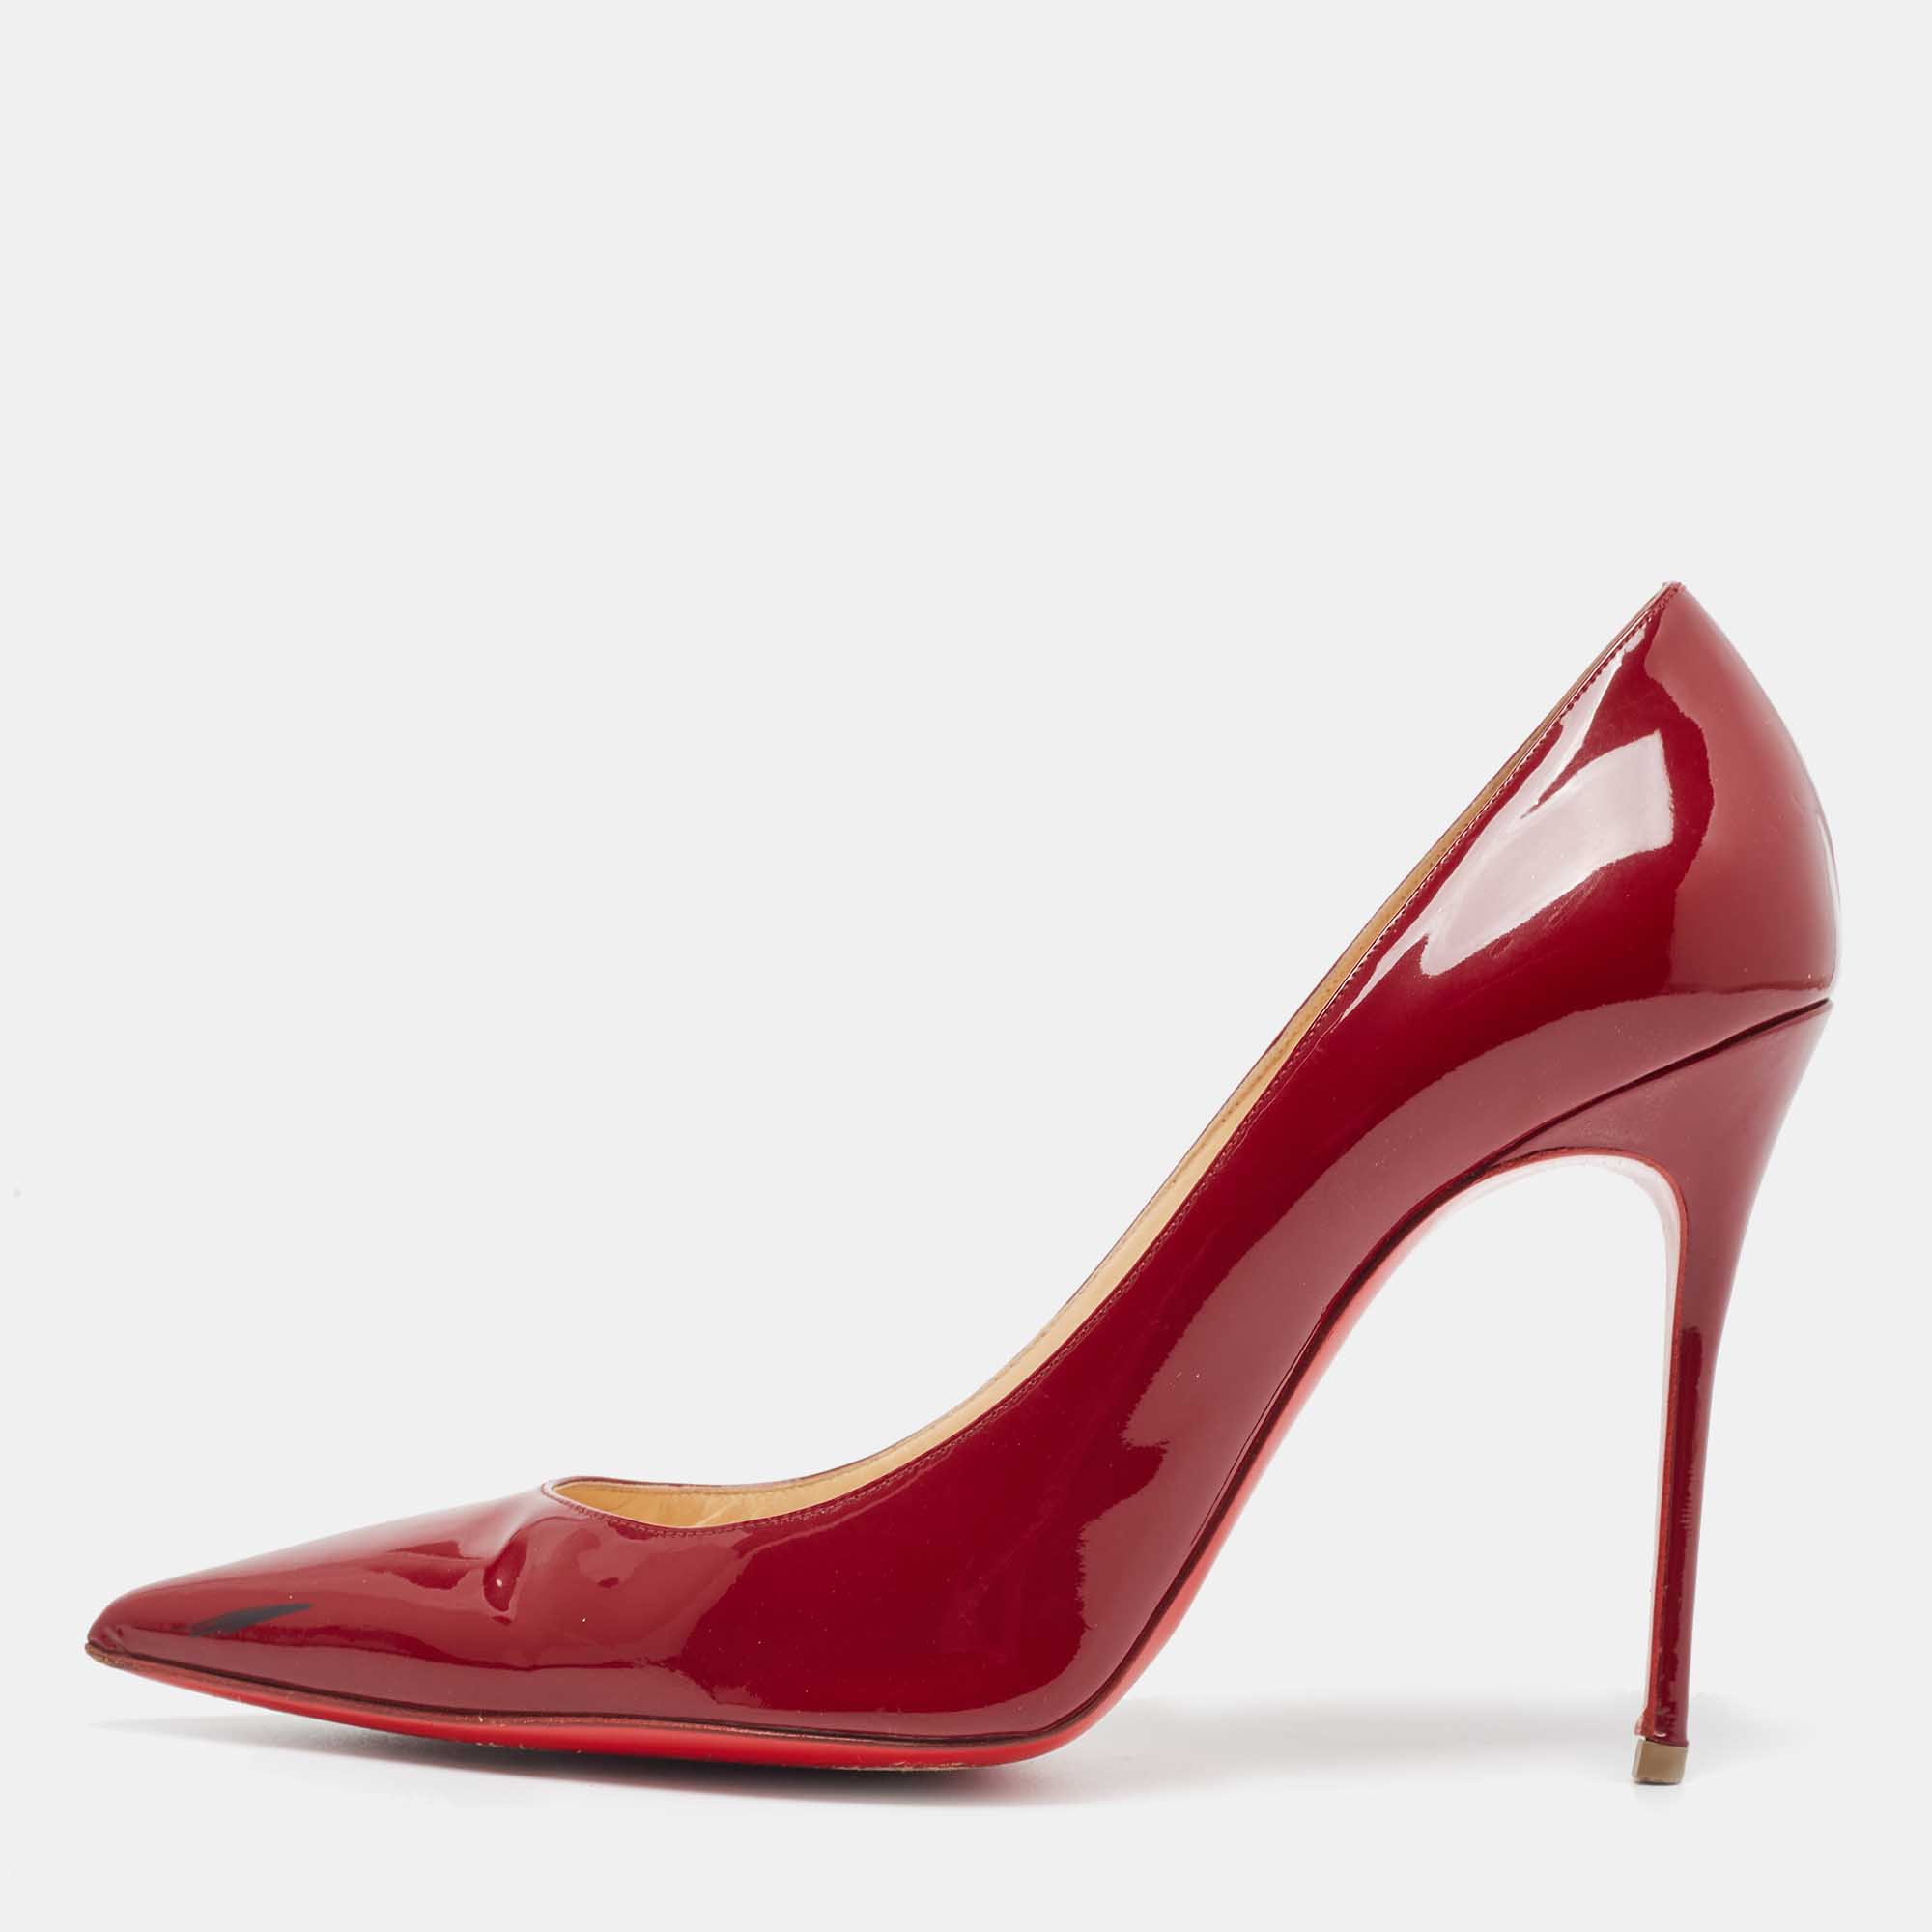 Pre-owned Christian Louboutin Burgundy Patent So Kate Pumps Size 40.5